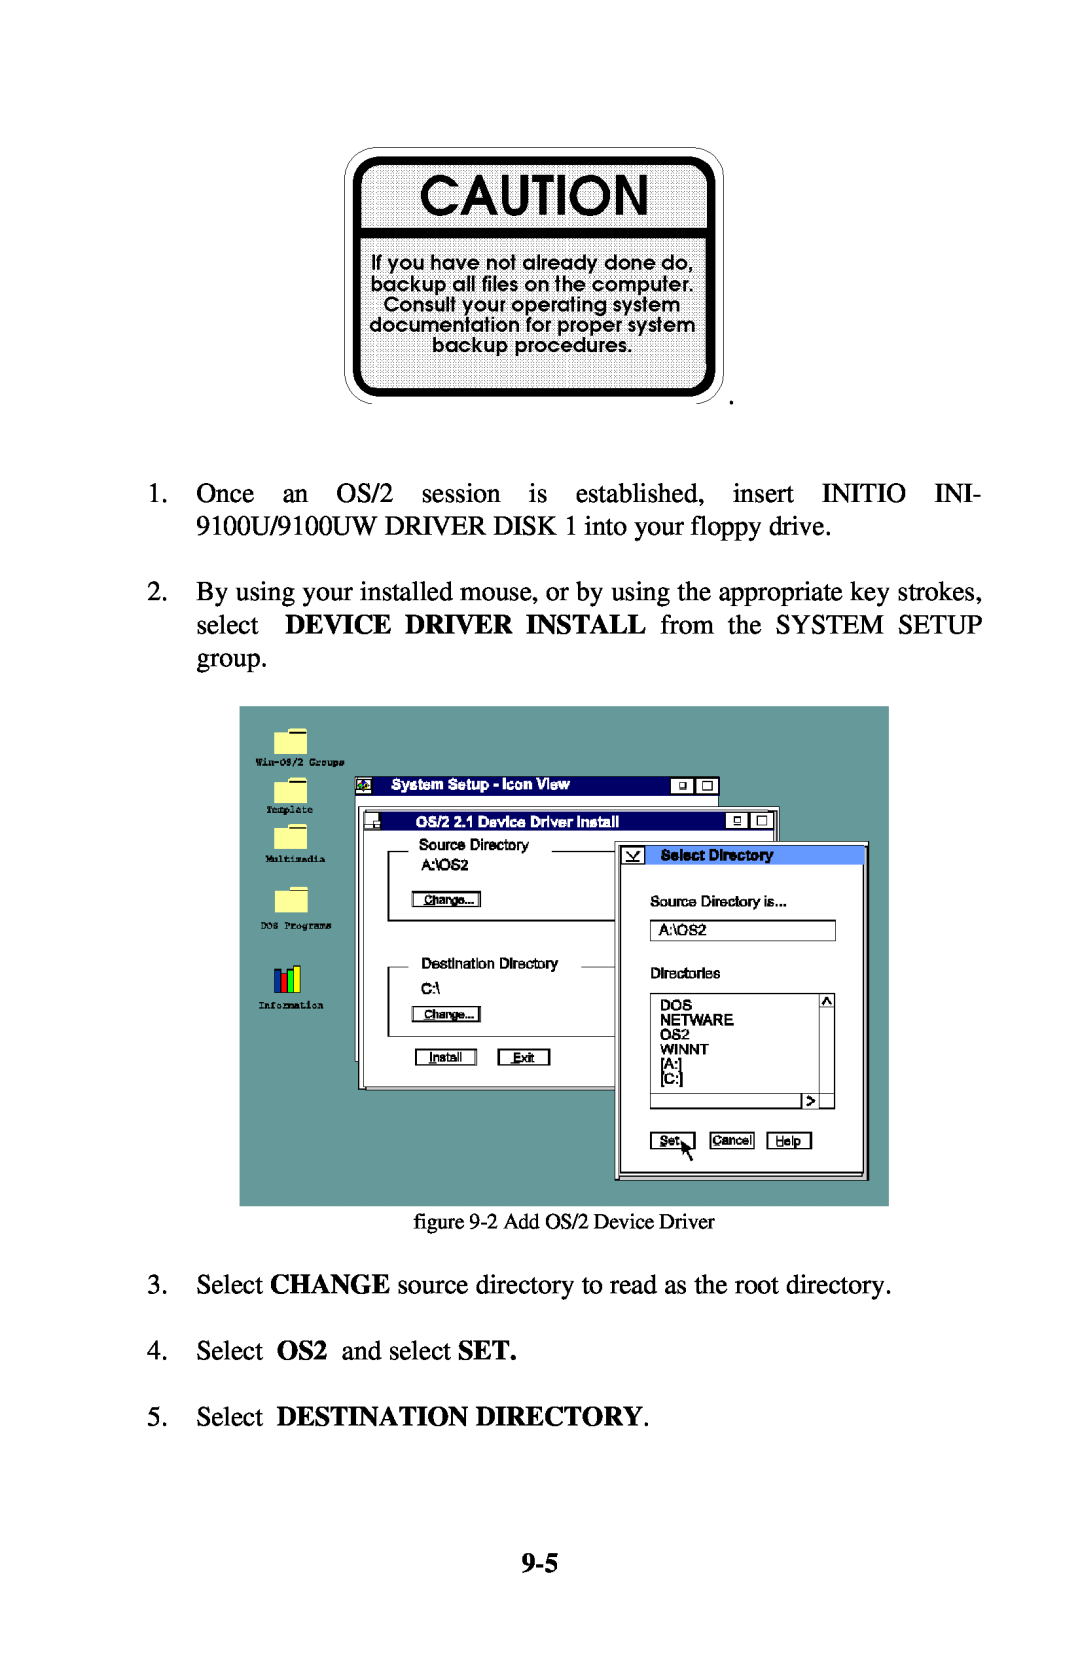 Initio INI-9100UW user manual Select DESTINATION DIRECTORY, Select CHANGE source directory to read as the root directory 